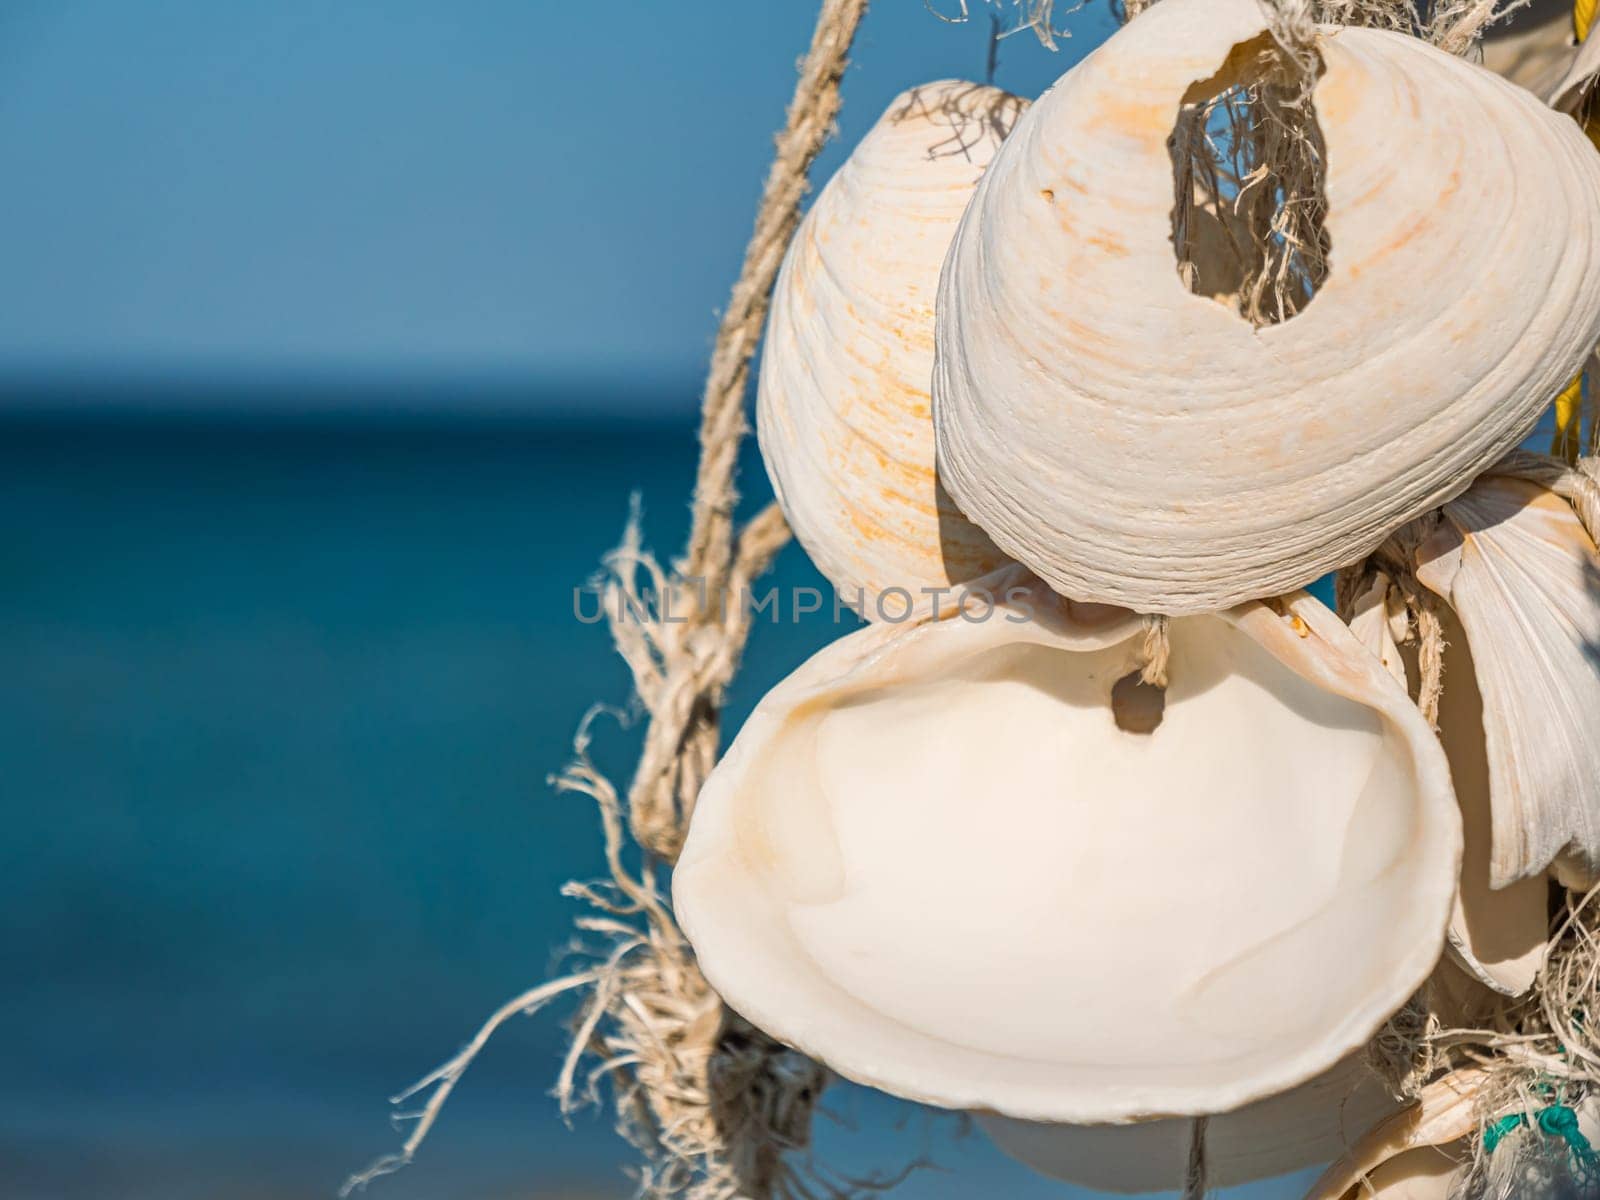 Seashell decoration hanging on beach with clear blue ocean in background during sunny day by Busker